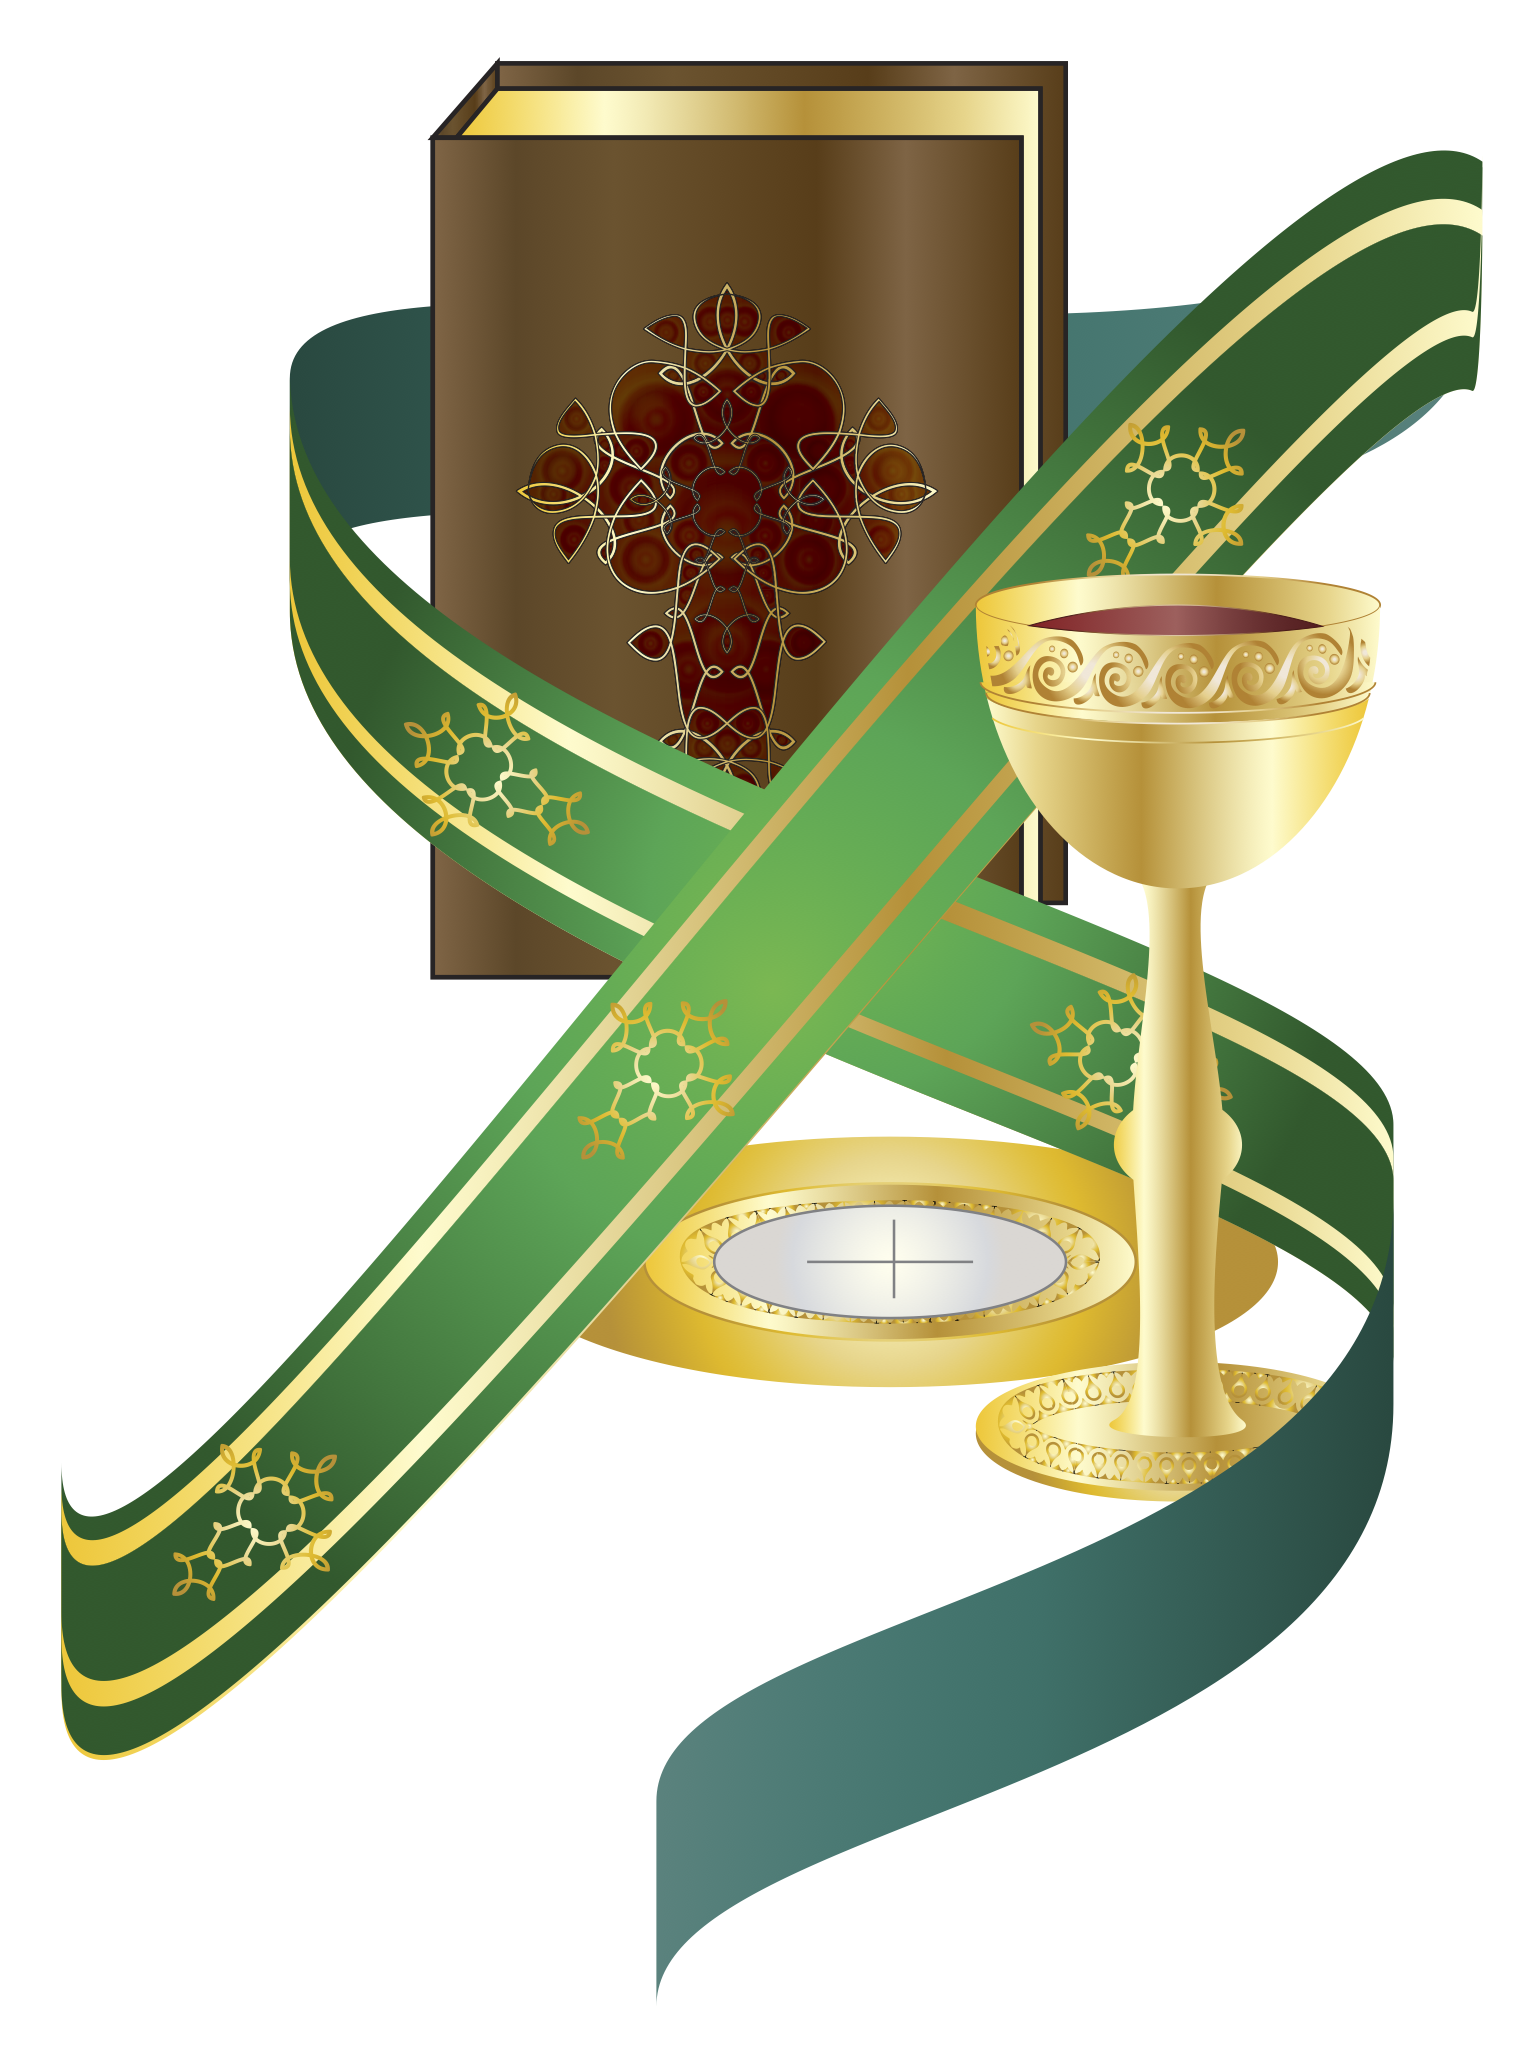 Vector image of Sacramentary, chalice, paten and host, and stole